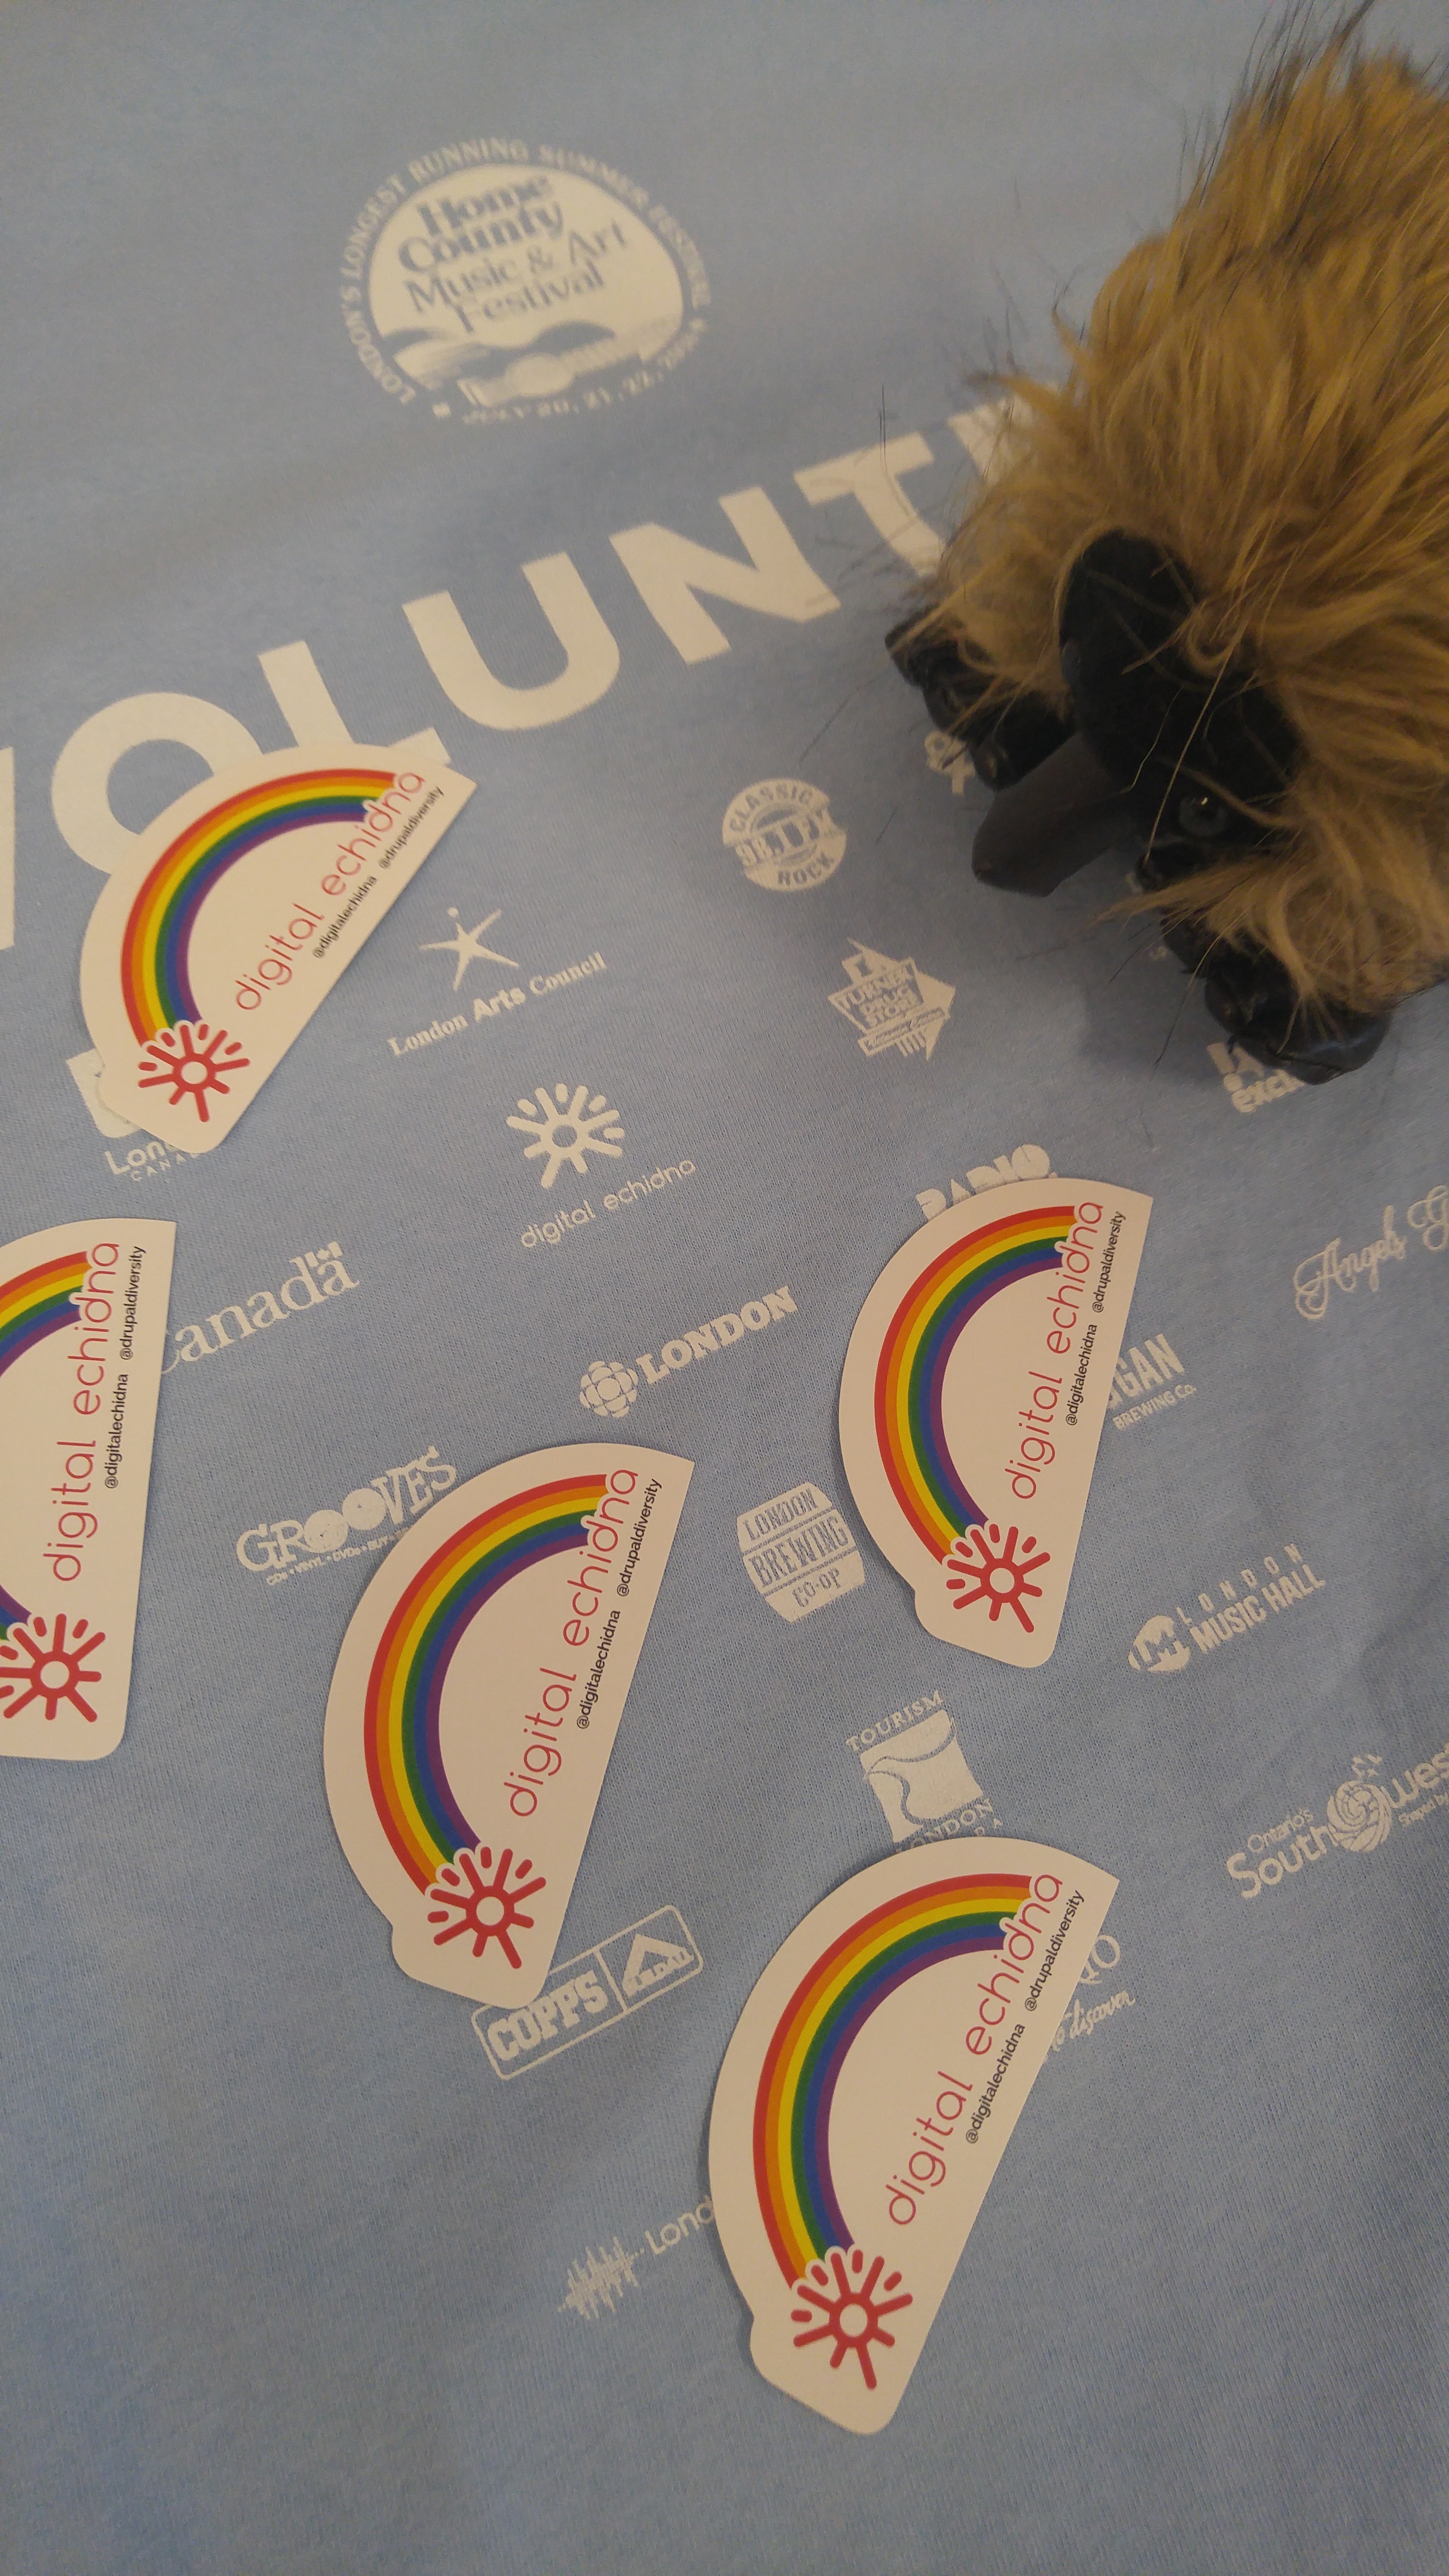 An image of a stuffed Echidna looking at a collection of Echidna Pride stickers surrounding Echida logo on Home County shirt.